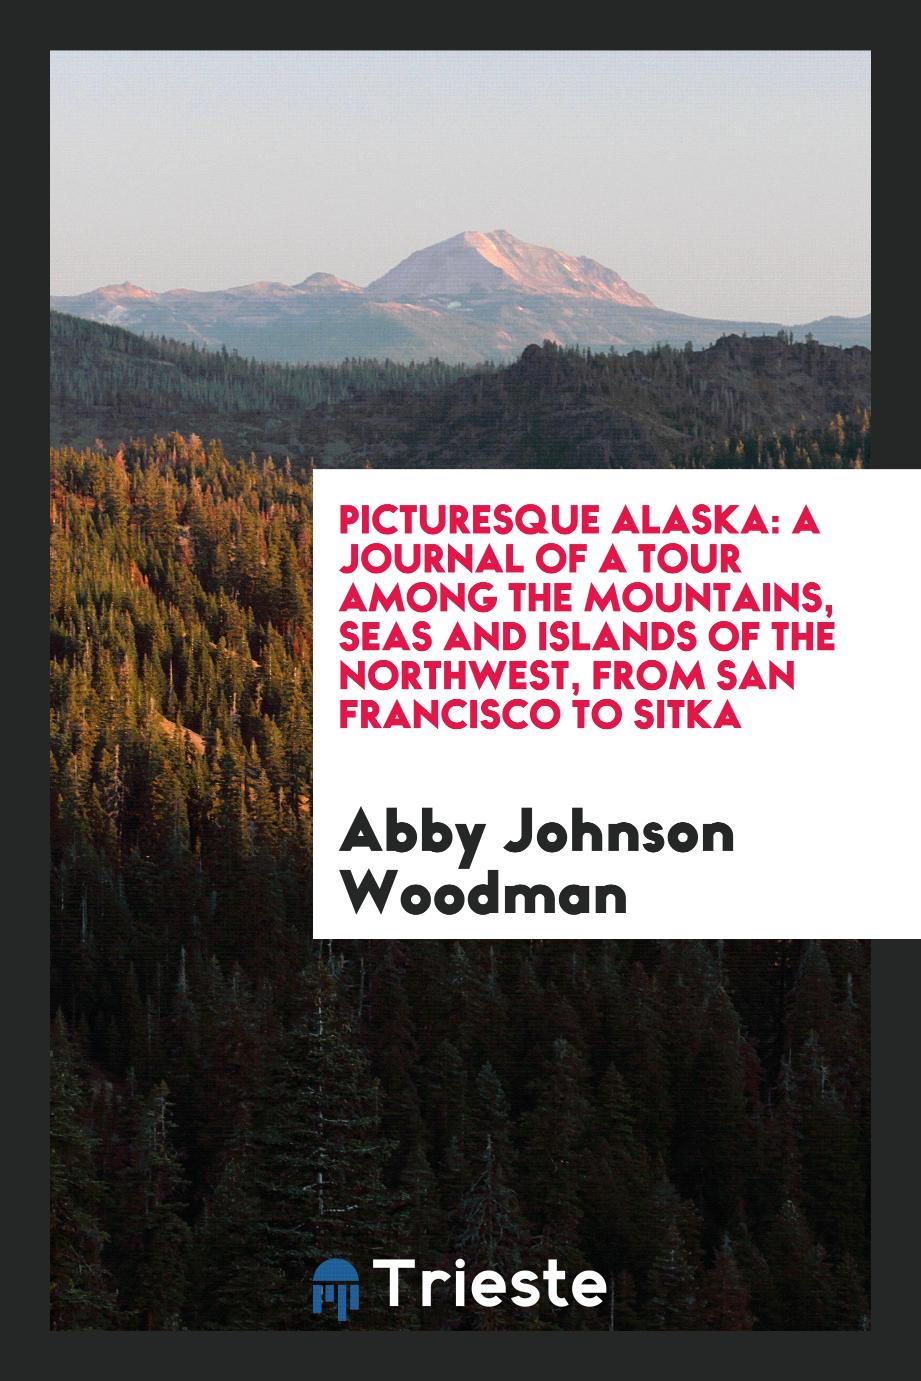 Picturesque Alaska: a journal of a tour among the mountains, seas and islands of the Northwest, from San Francisco to Sitka